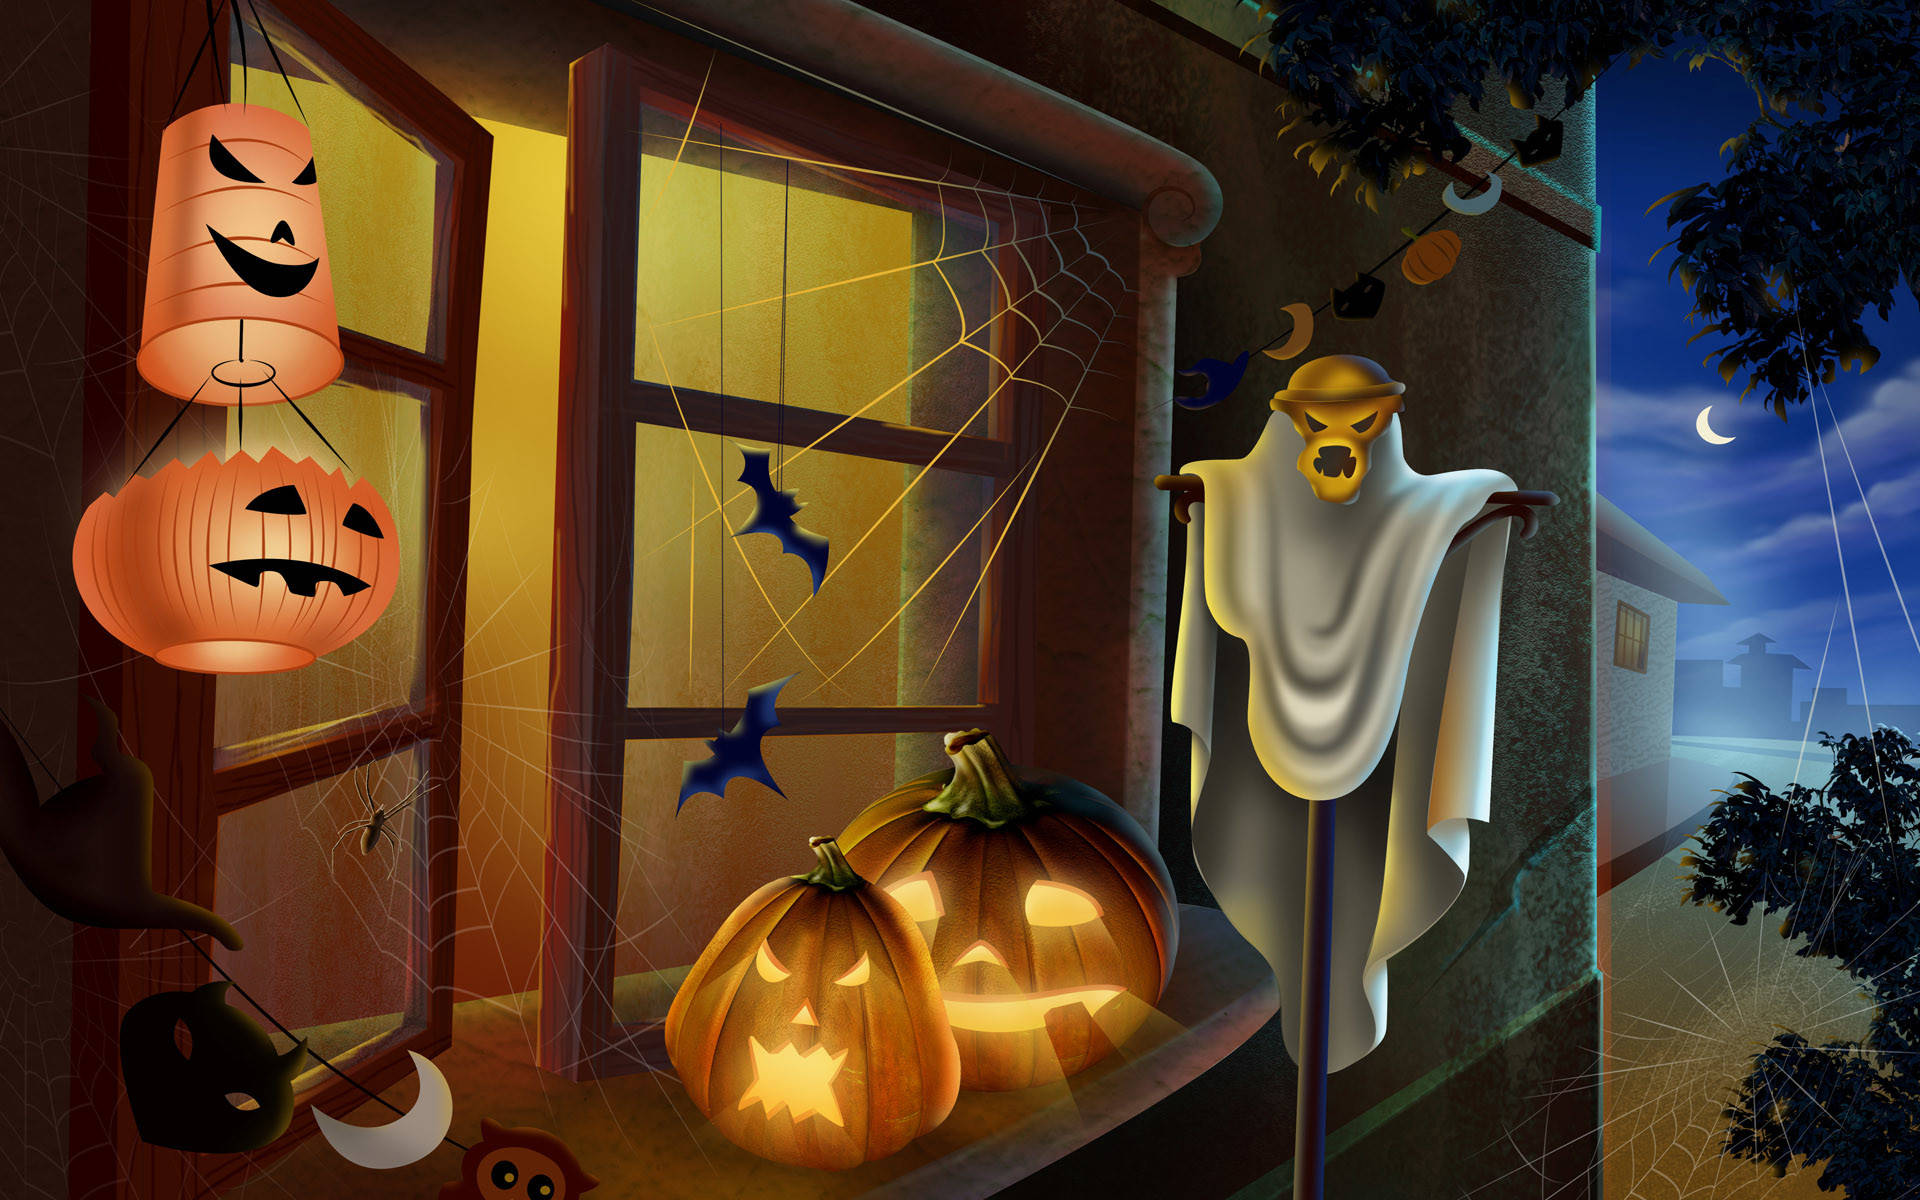 Grab A Spooky Halloween Desktop Theme For Your Computer – Brand … Grab A Spooky Halloween Desktop Theme For Your Computer Brand Background